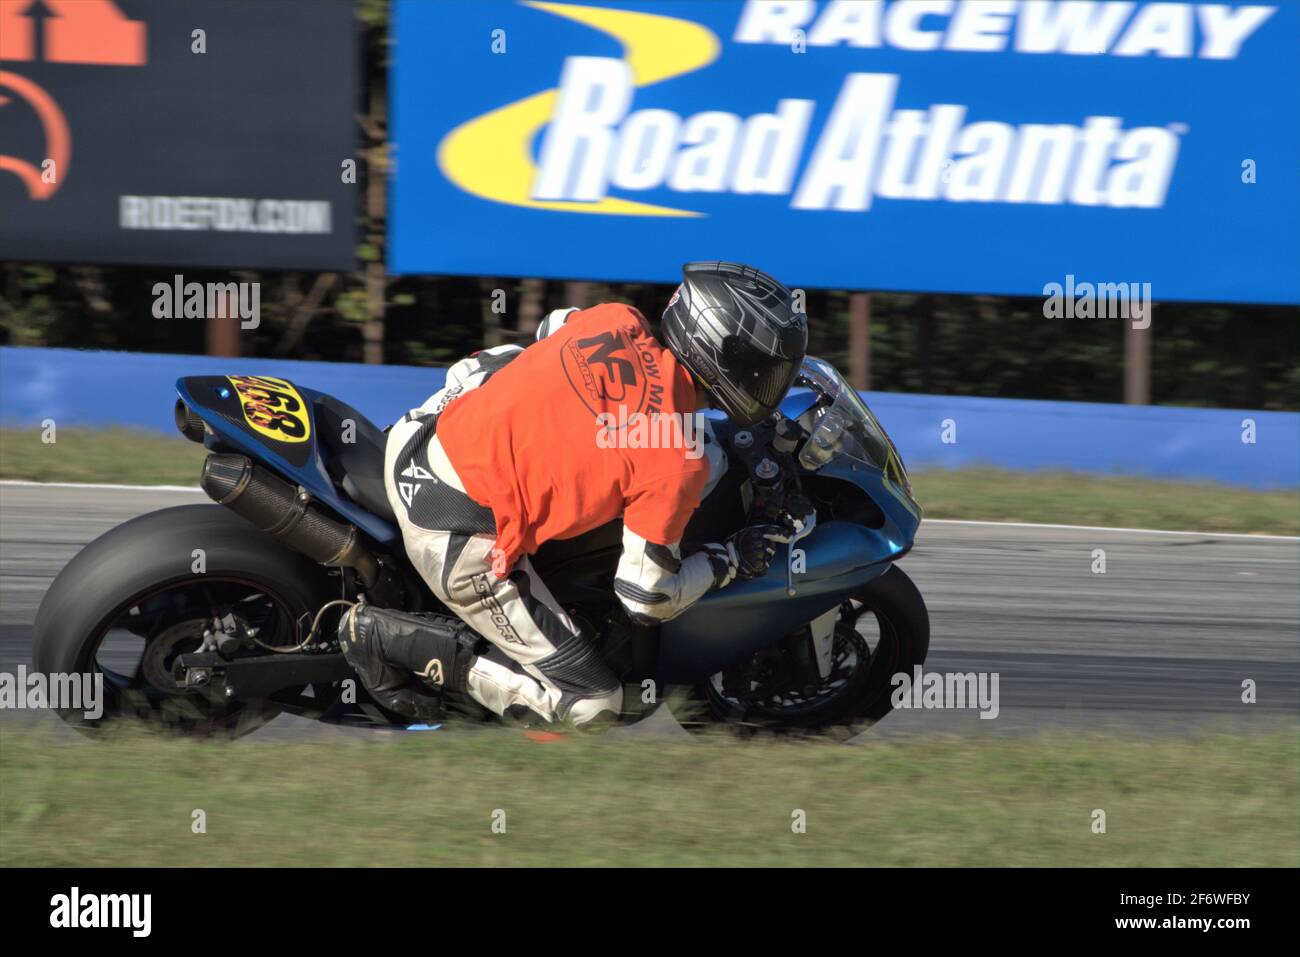 N2 Track Days Control Rider rides through turn 7 at Michelin Speedway Road Atlanta in October 2020 in preparation for the rescheduled WERA Cycle Jam. Stock Photo